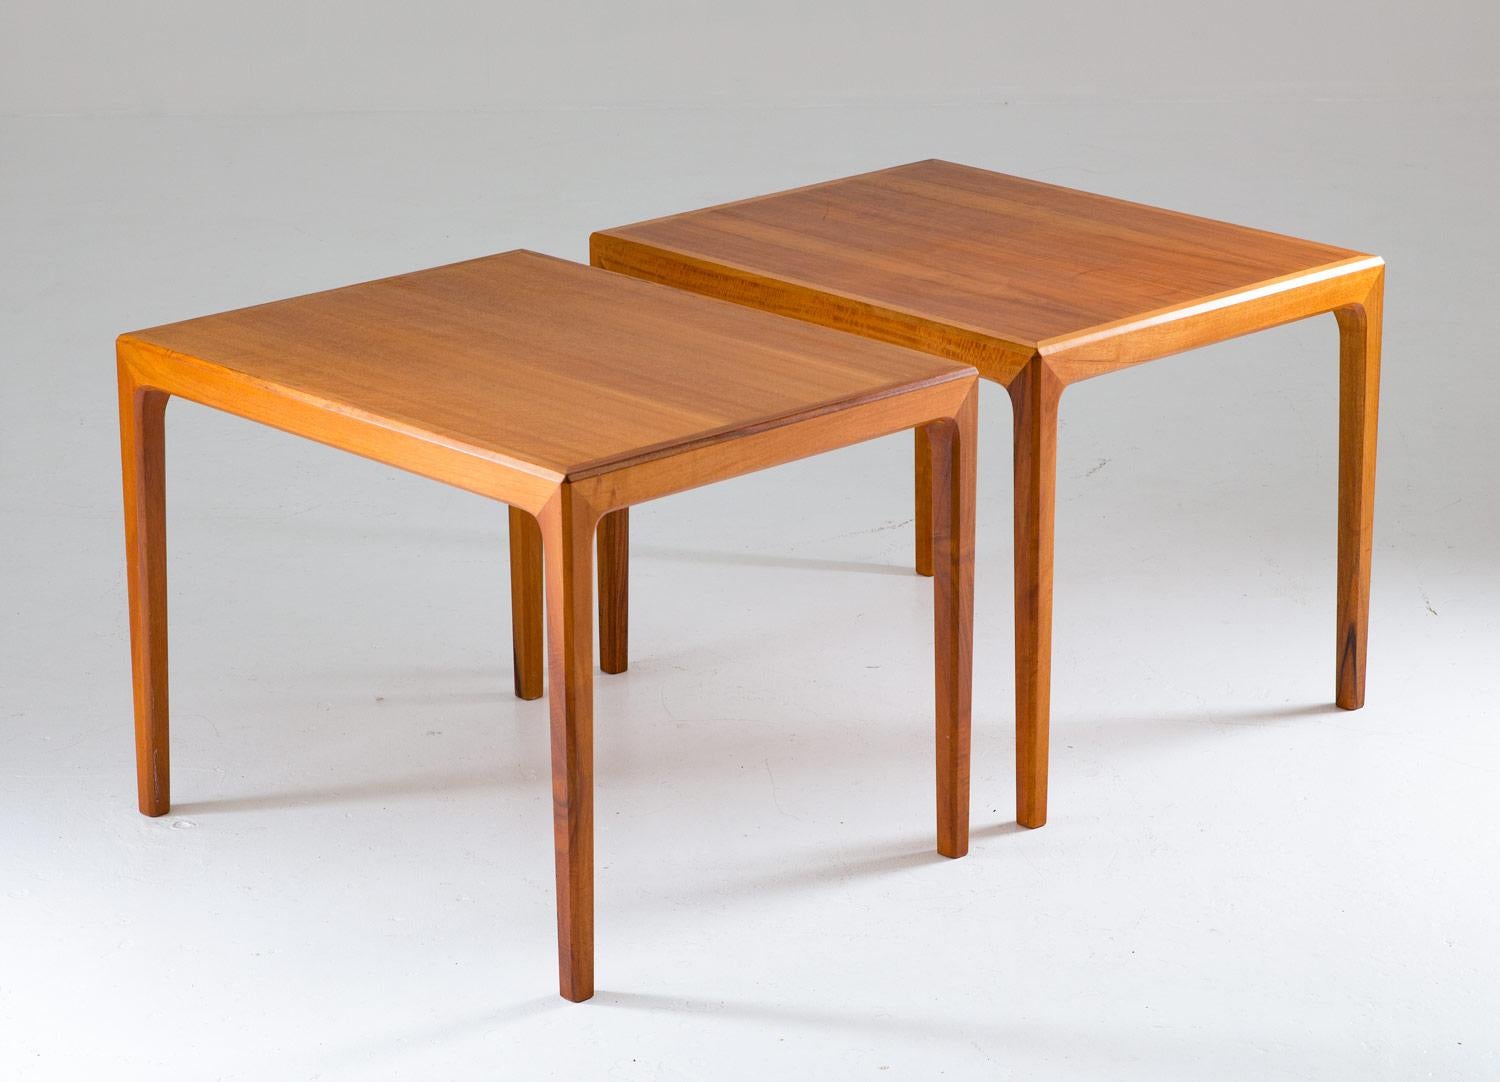 A pair of midcentury side tables in walnut by Bertil Fridhagen for Bodafors, Sweden.
These high-quality side tables have a minimalistic design with distinct lines.
Condition: Good original condition. A few ring marks on one of the tables and one